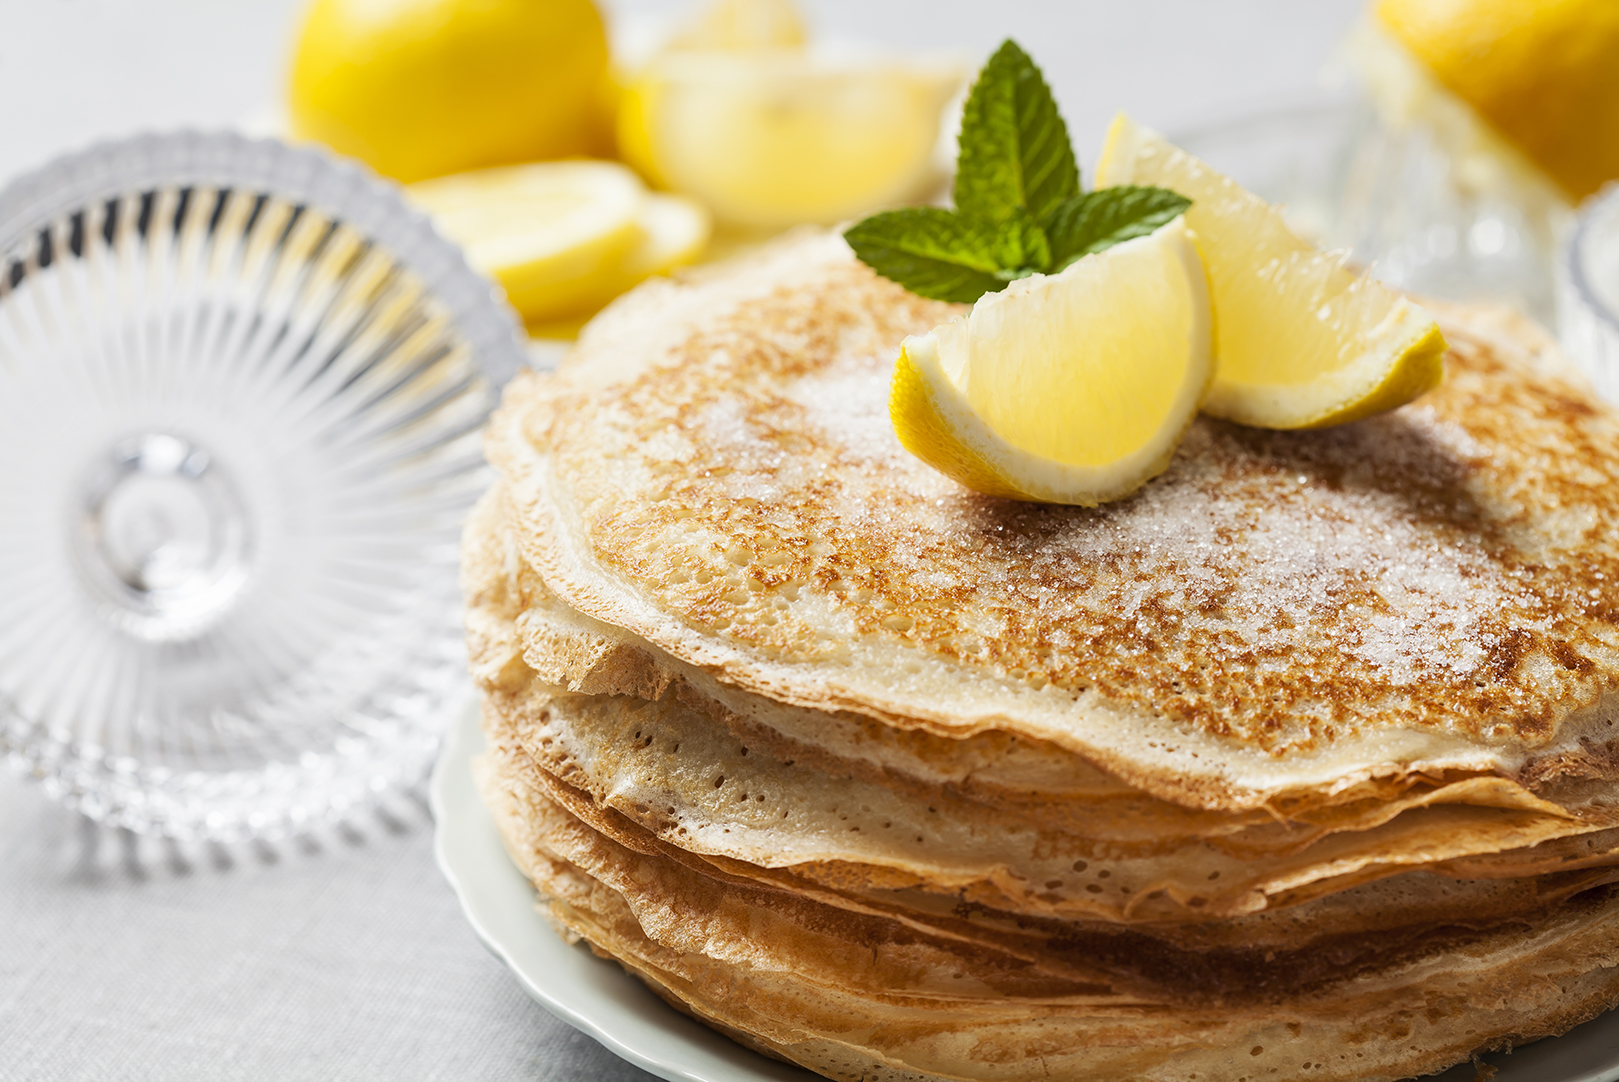 Classic pancakes with lemon and sugar